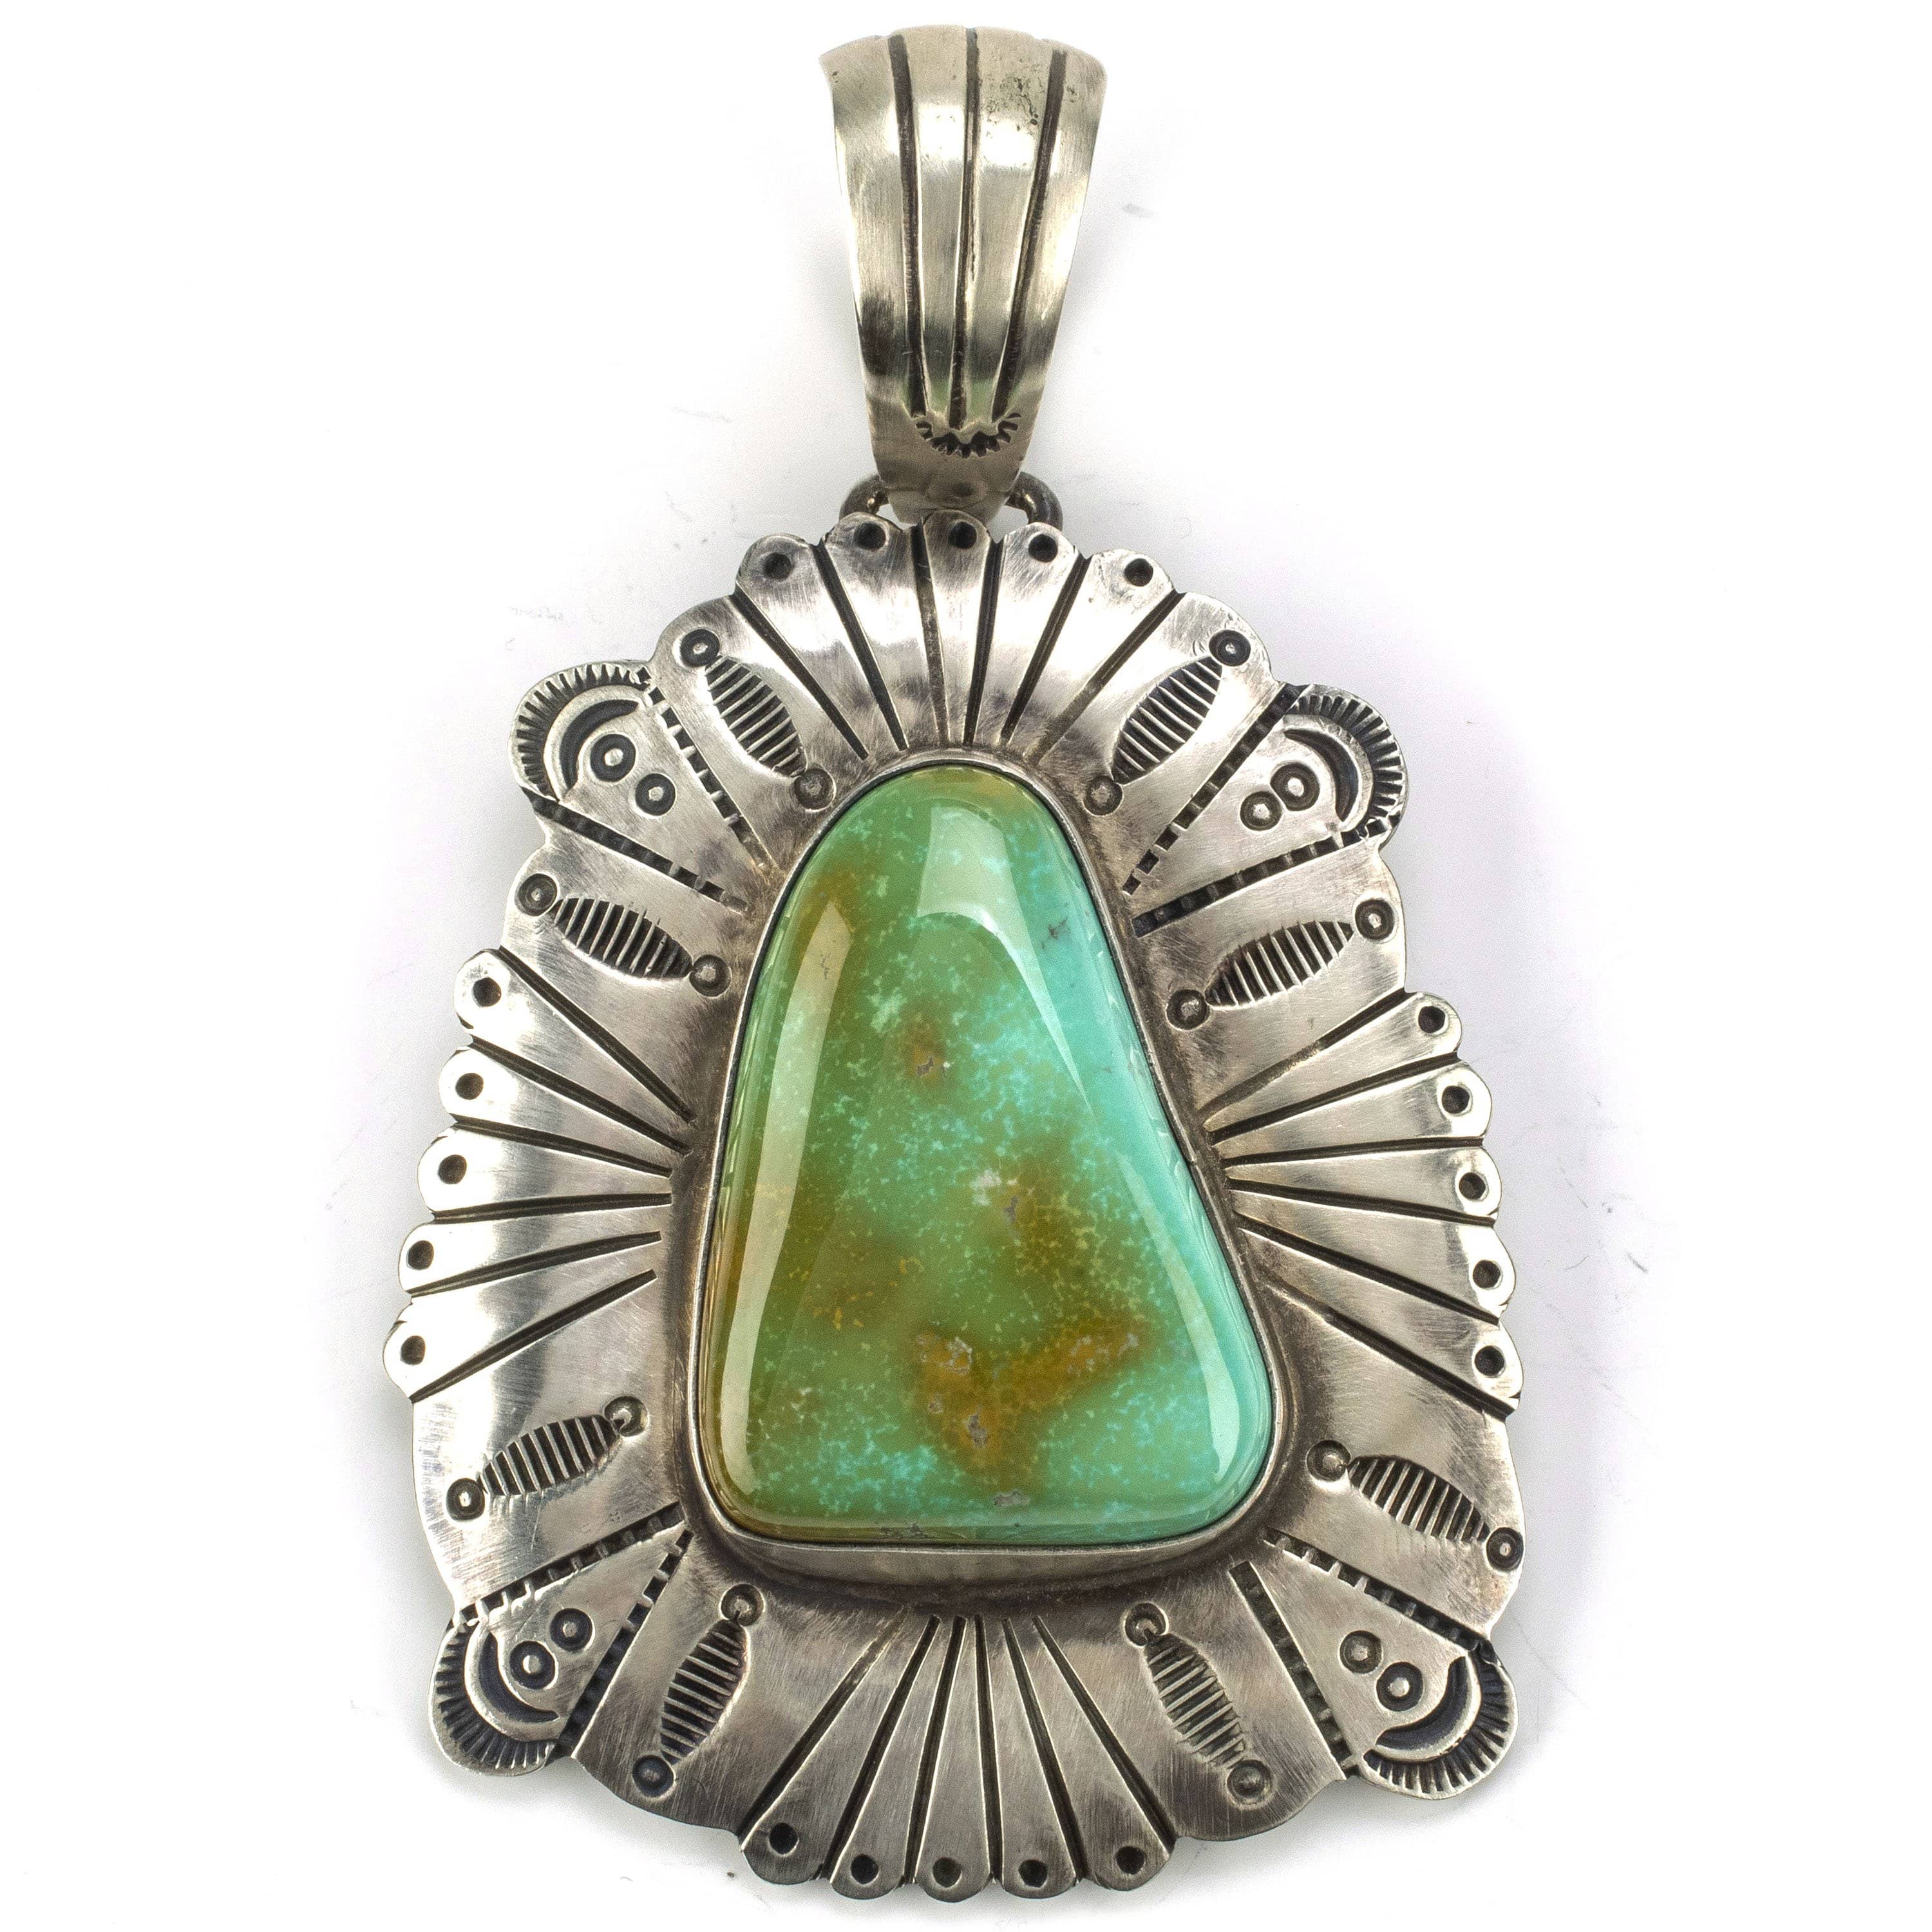 Kalifano Native American Jewelry Marvin McReeves Carico Lake Turquoise USA Native American Made 925 Sterling Silver Pendant NAN1800.011